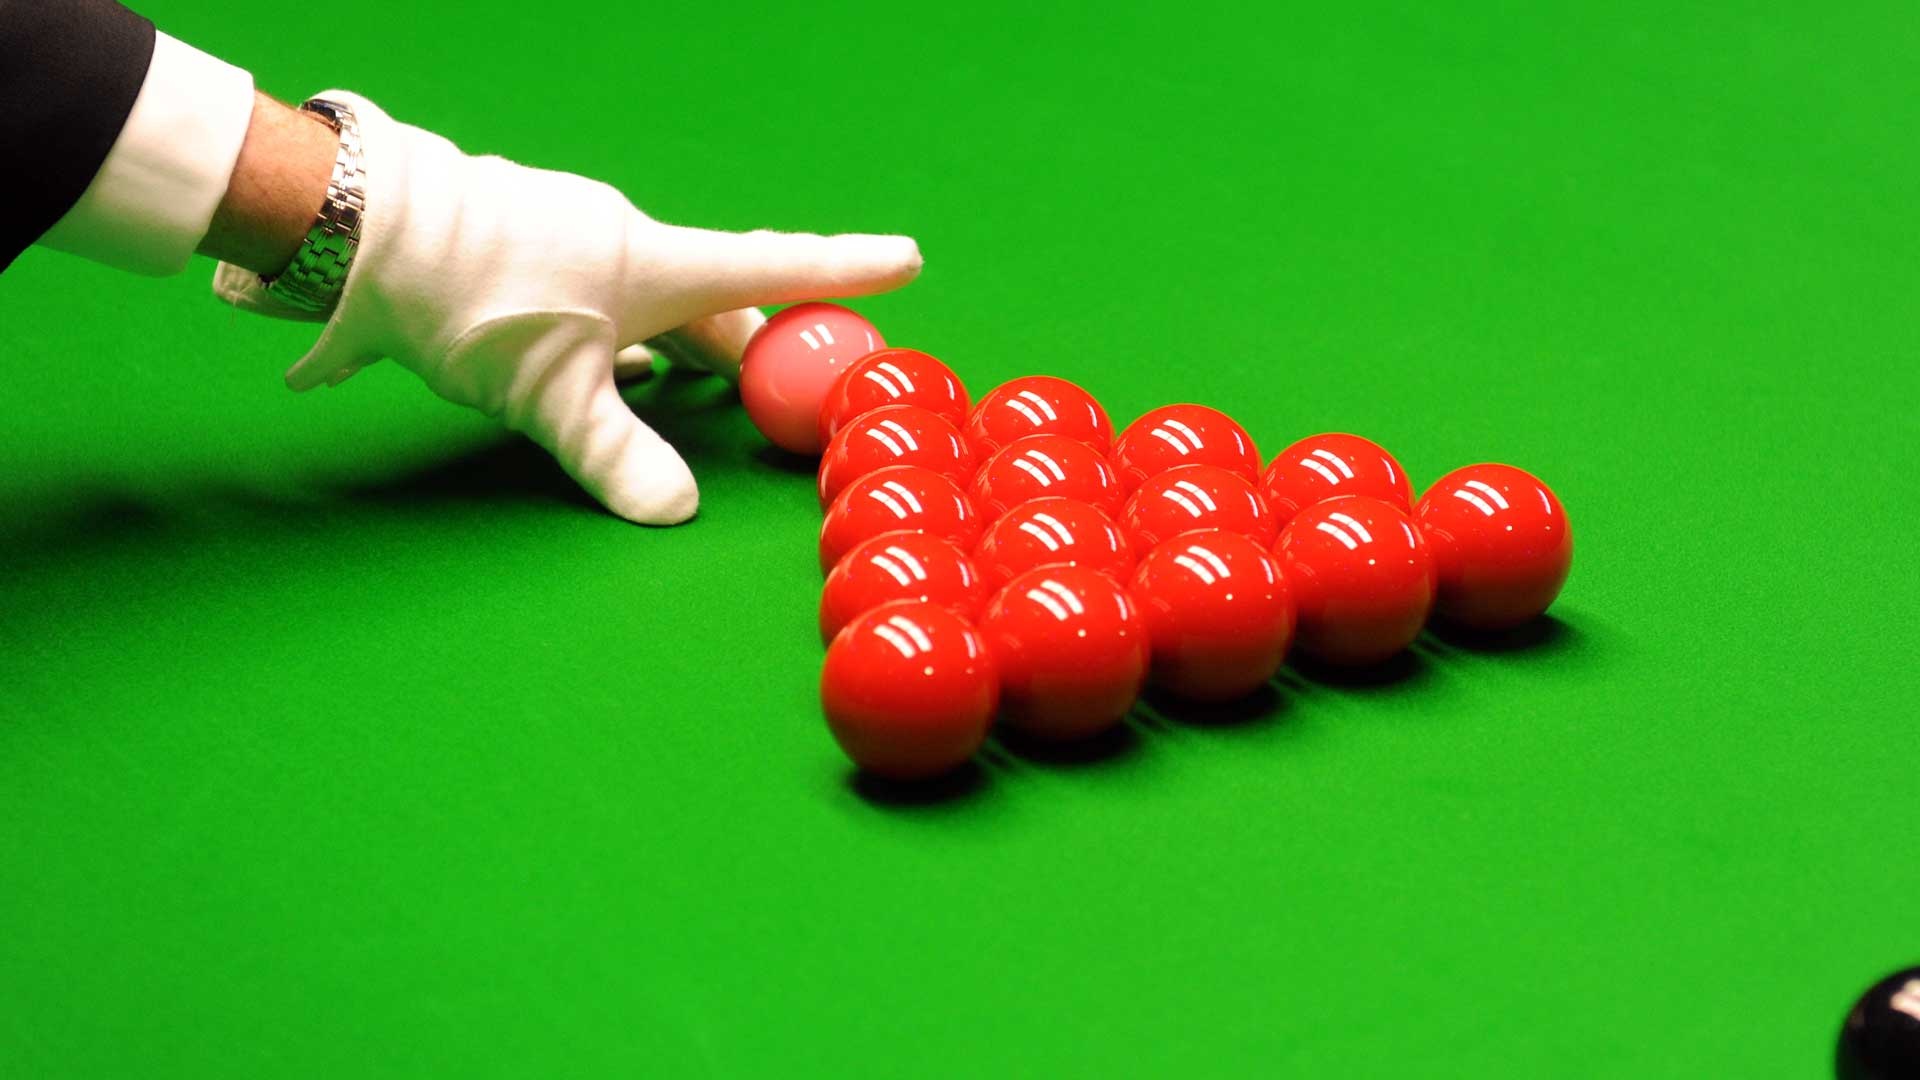 Snooker: Last preparations before the start of The World Snooker Championship organized by WPBSA. 1920x1080 Full HD Background.